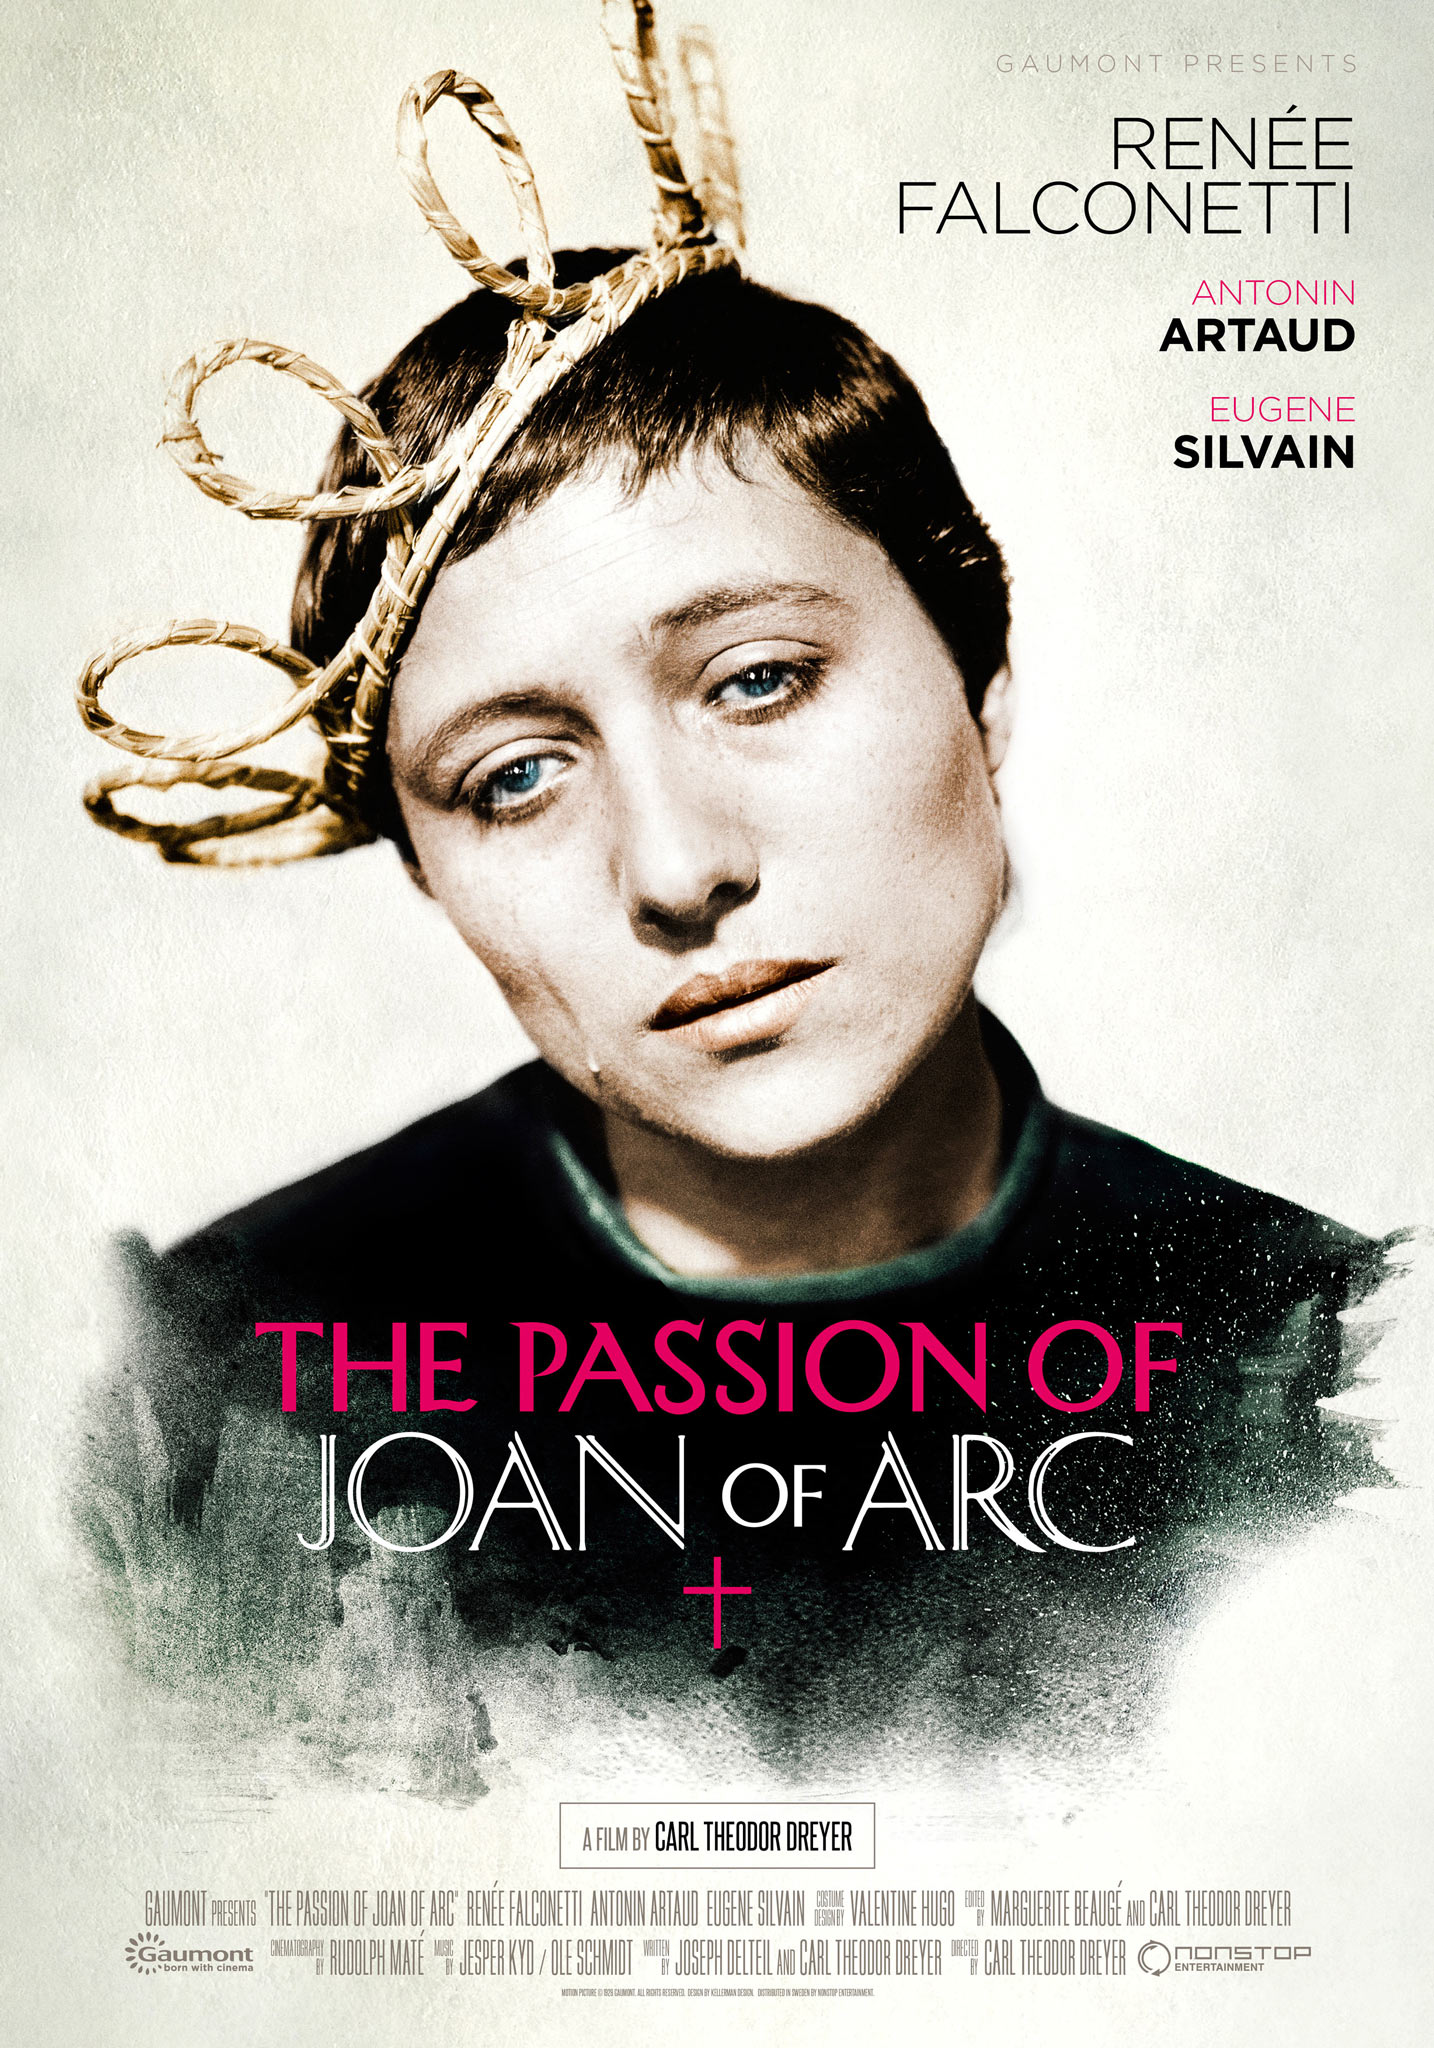 The Passion of Joan of Arc (1928) theatrical onesheet